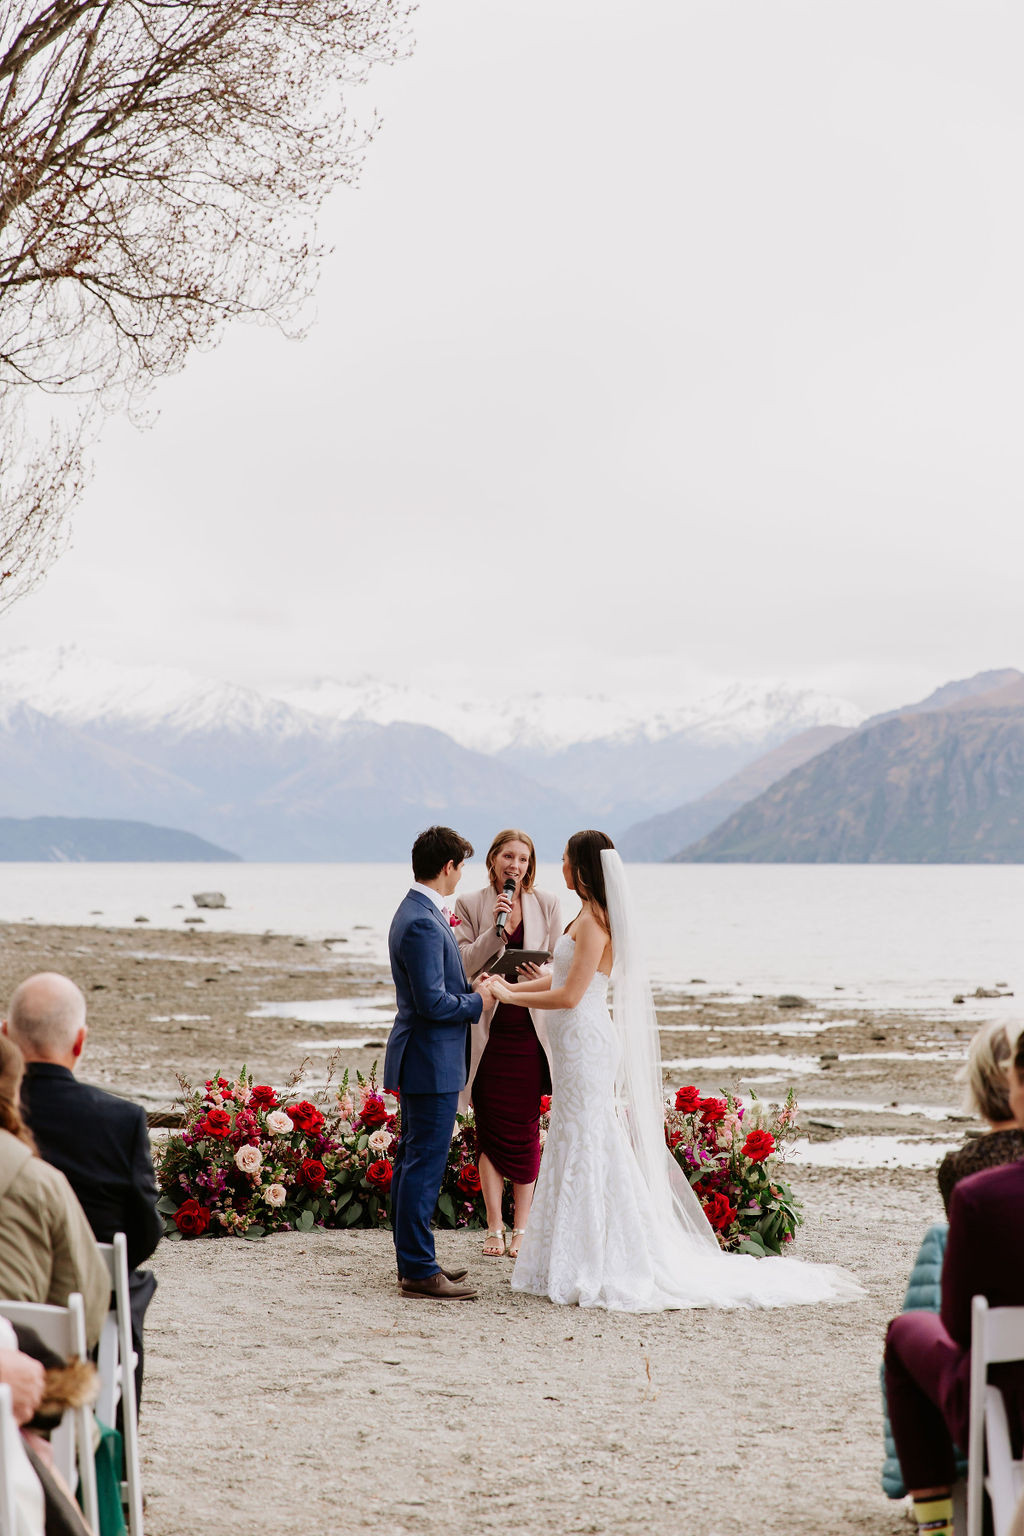 A couple getting married in front of Lake Wānaka